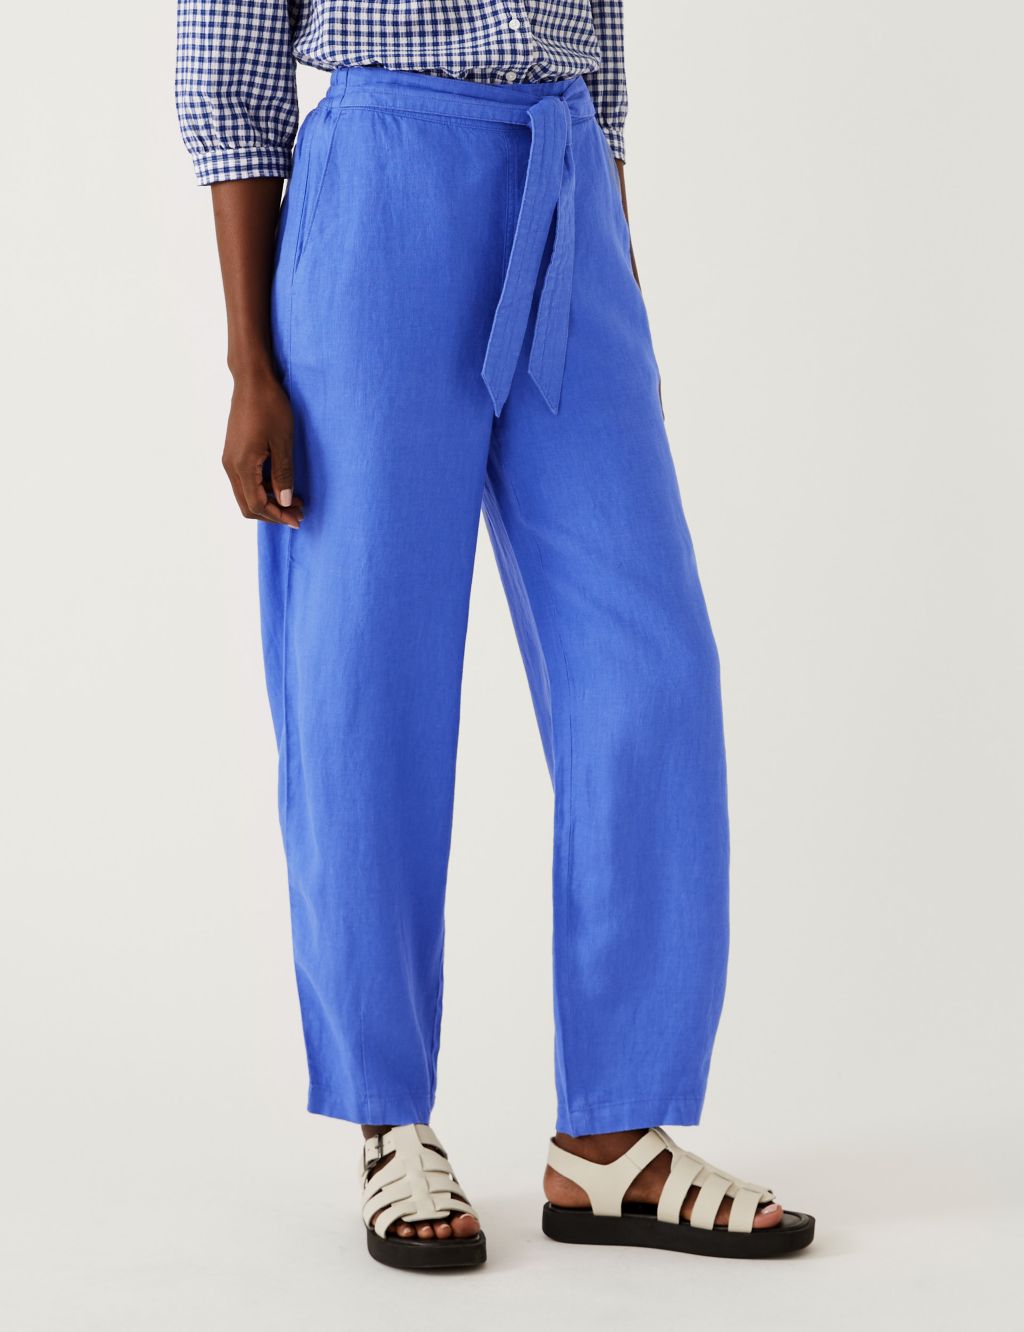 Pure Linen Printed Belted Balloon Trousers image 2